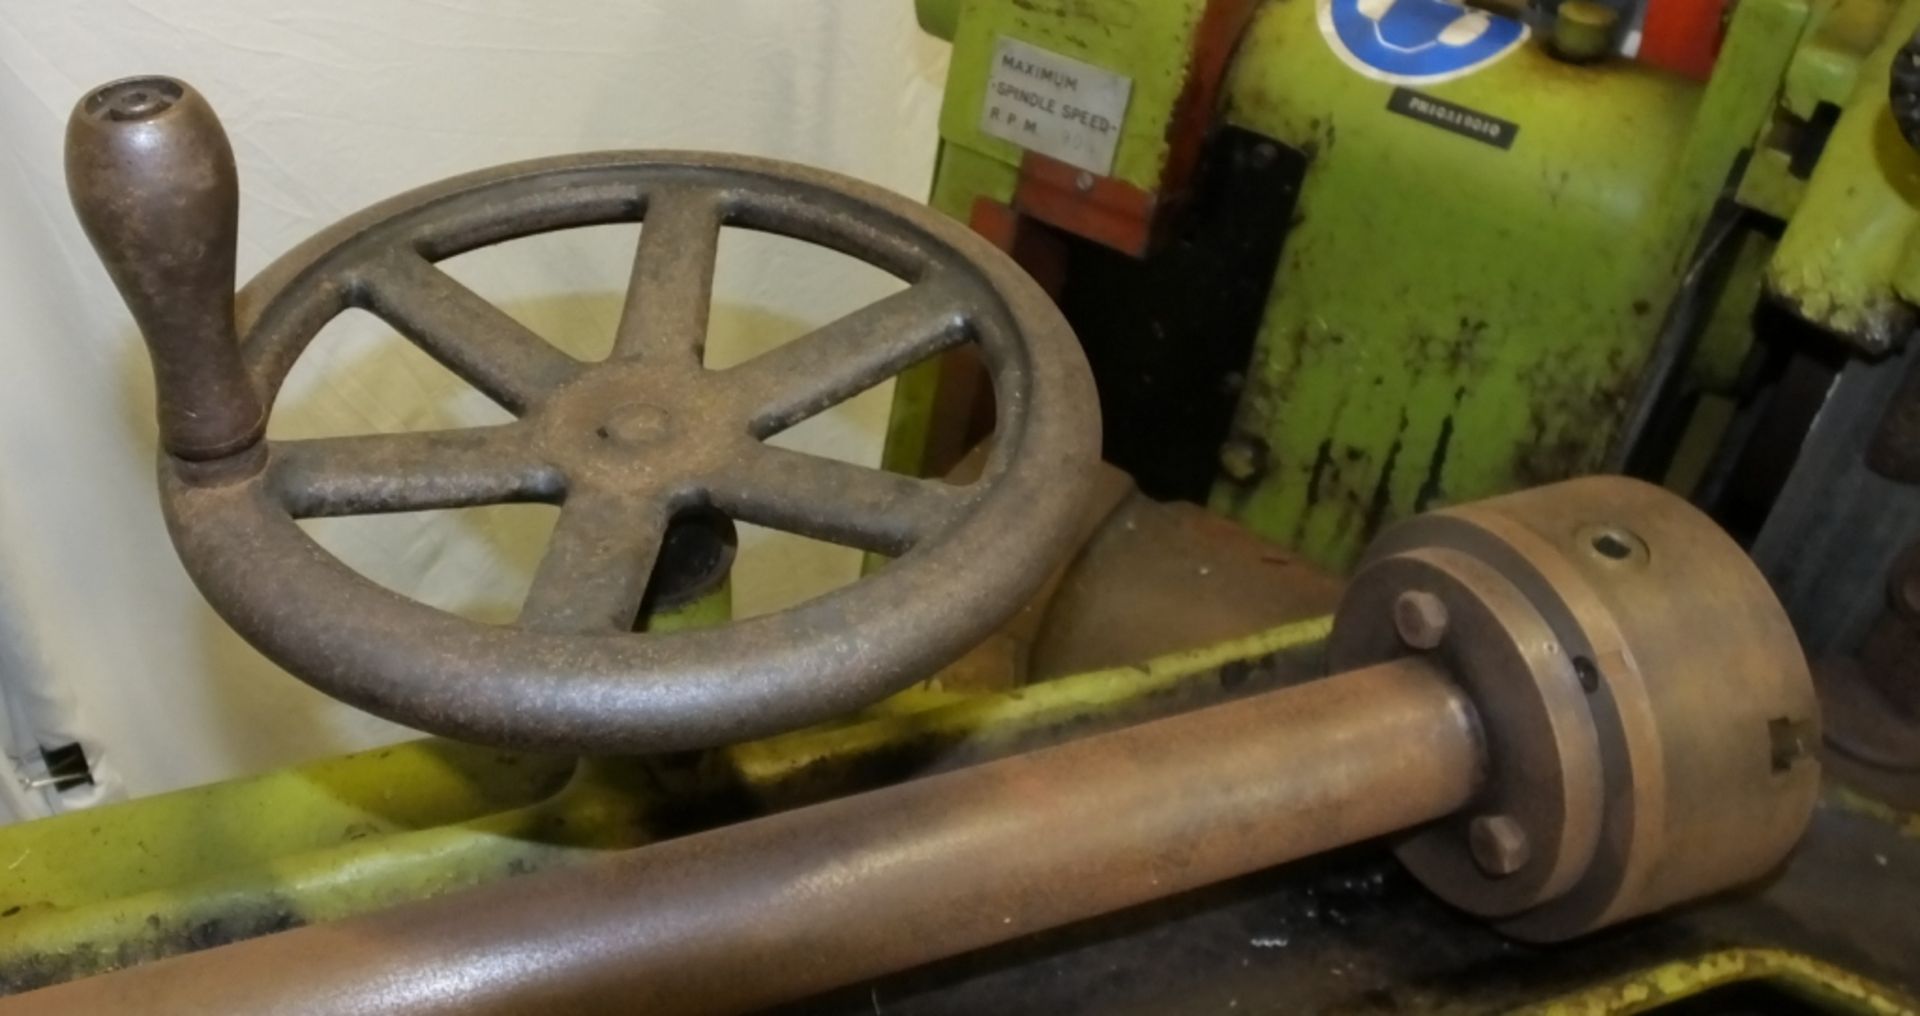 Herbert Hunt & Sons Drill Sharpening Machine - £5 Loading Charge Applied to this lot - Image 4 of 6